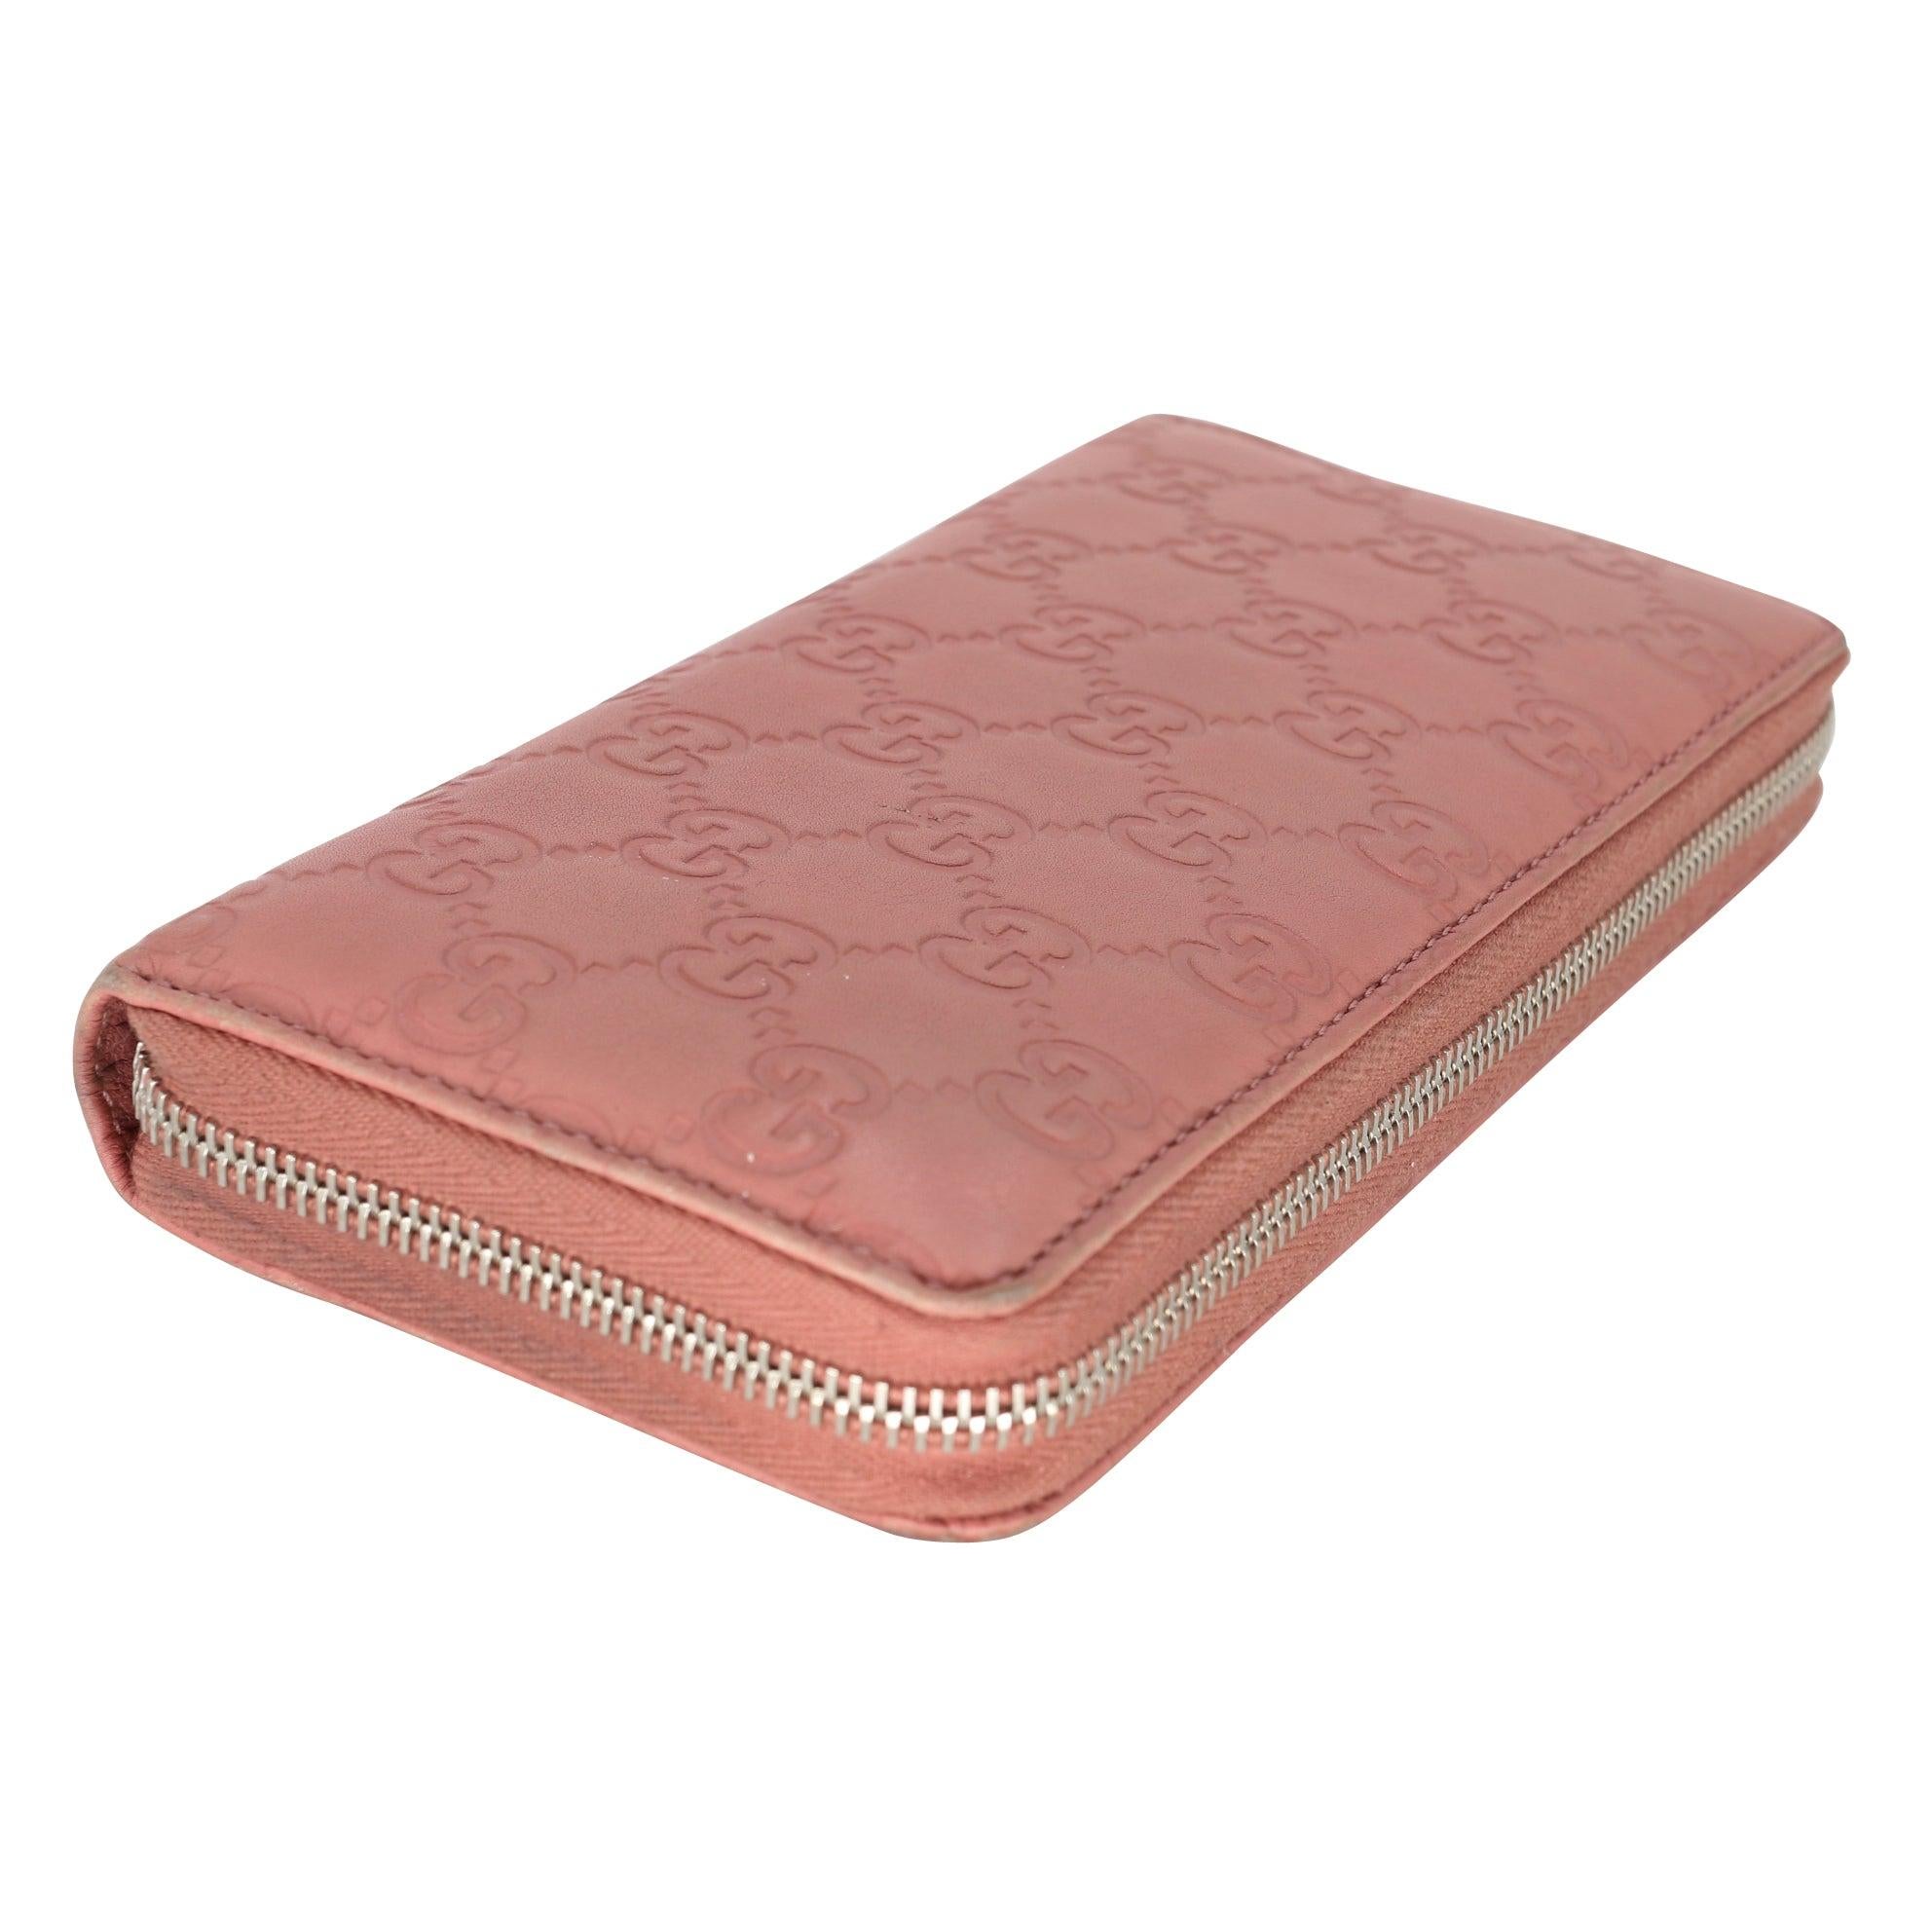 Gucci GG Guccissima Pink Leather Zip Around Wallet LV-W1110P-A003 For Sale 2